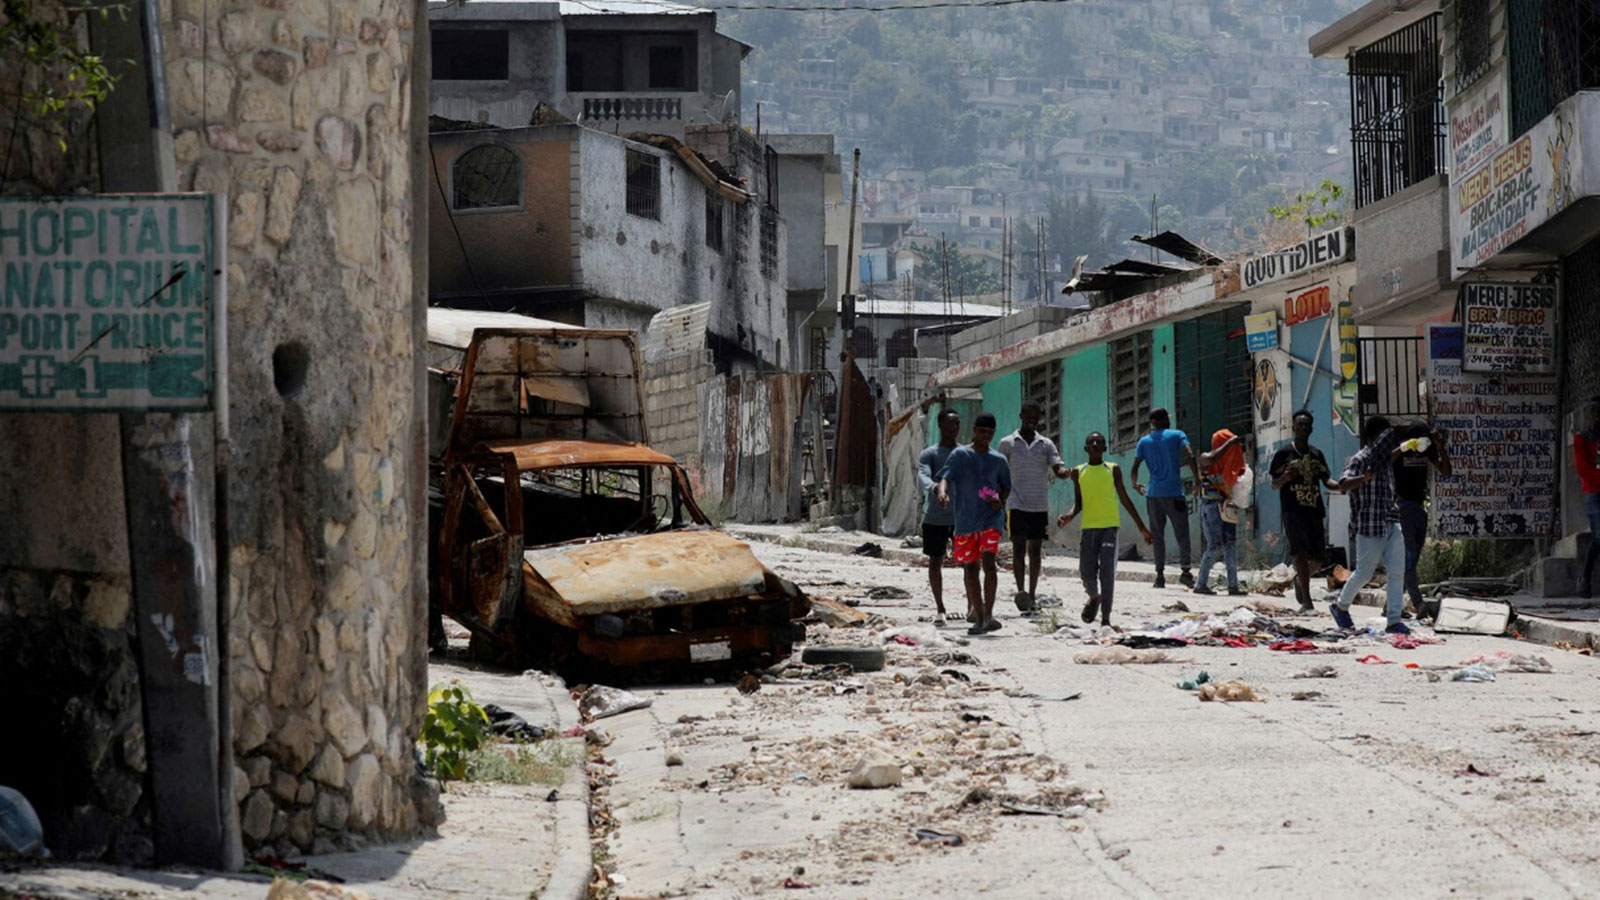 As Haiti crumbles around us, we hold our communities together